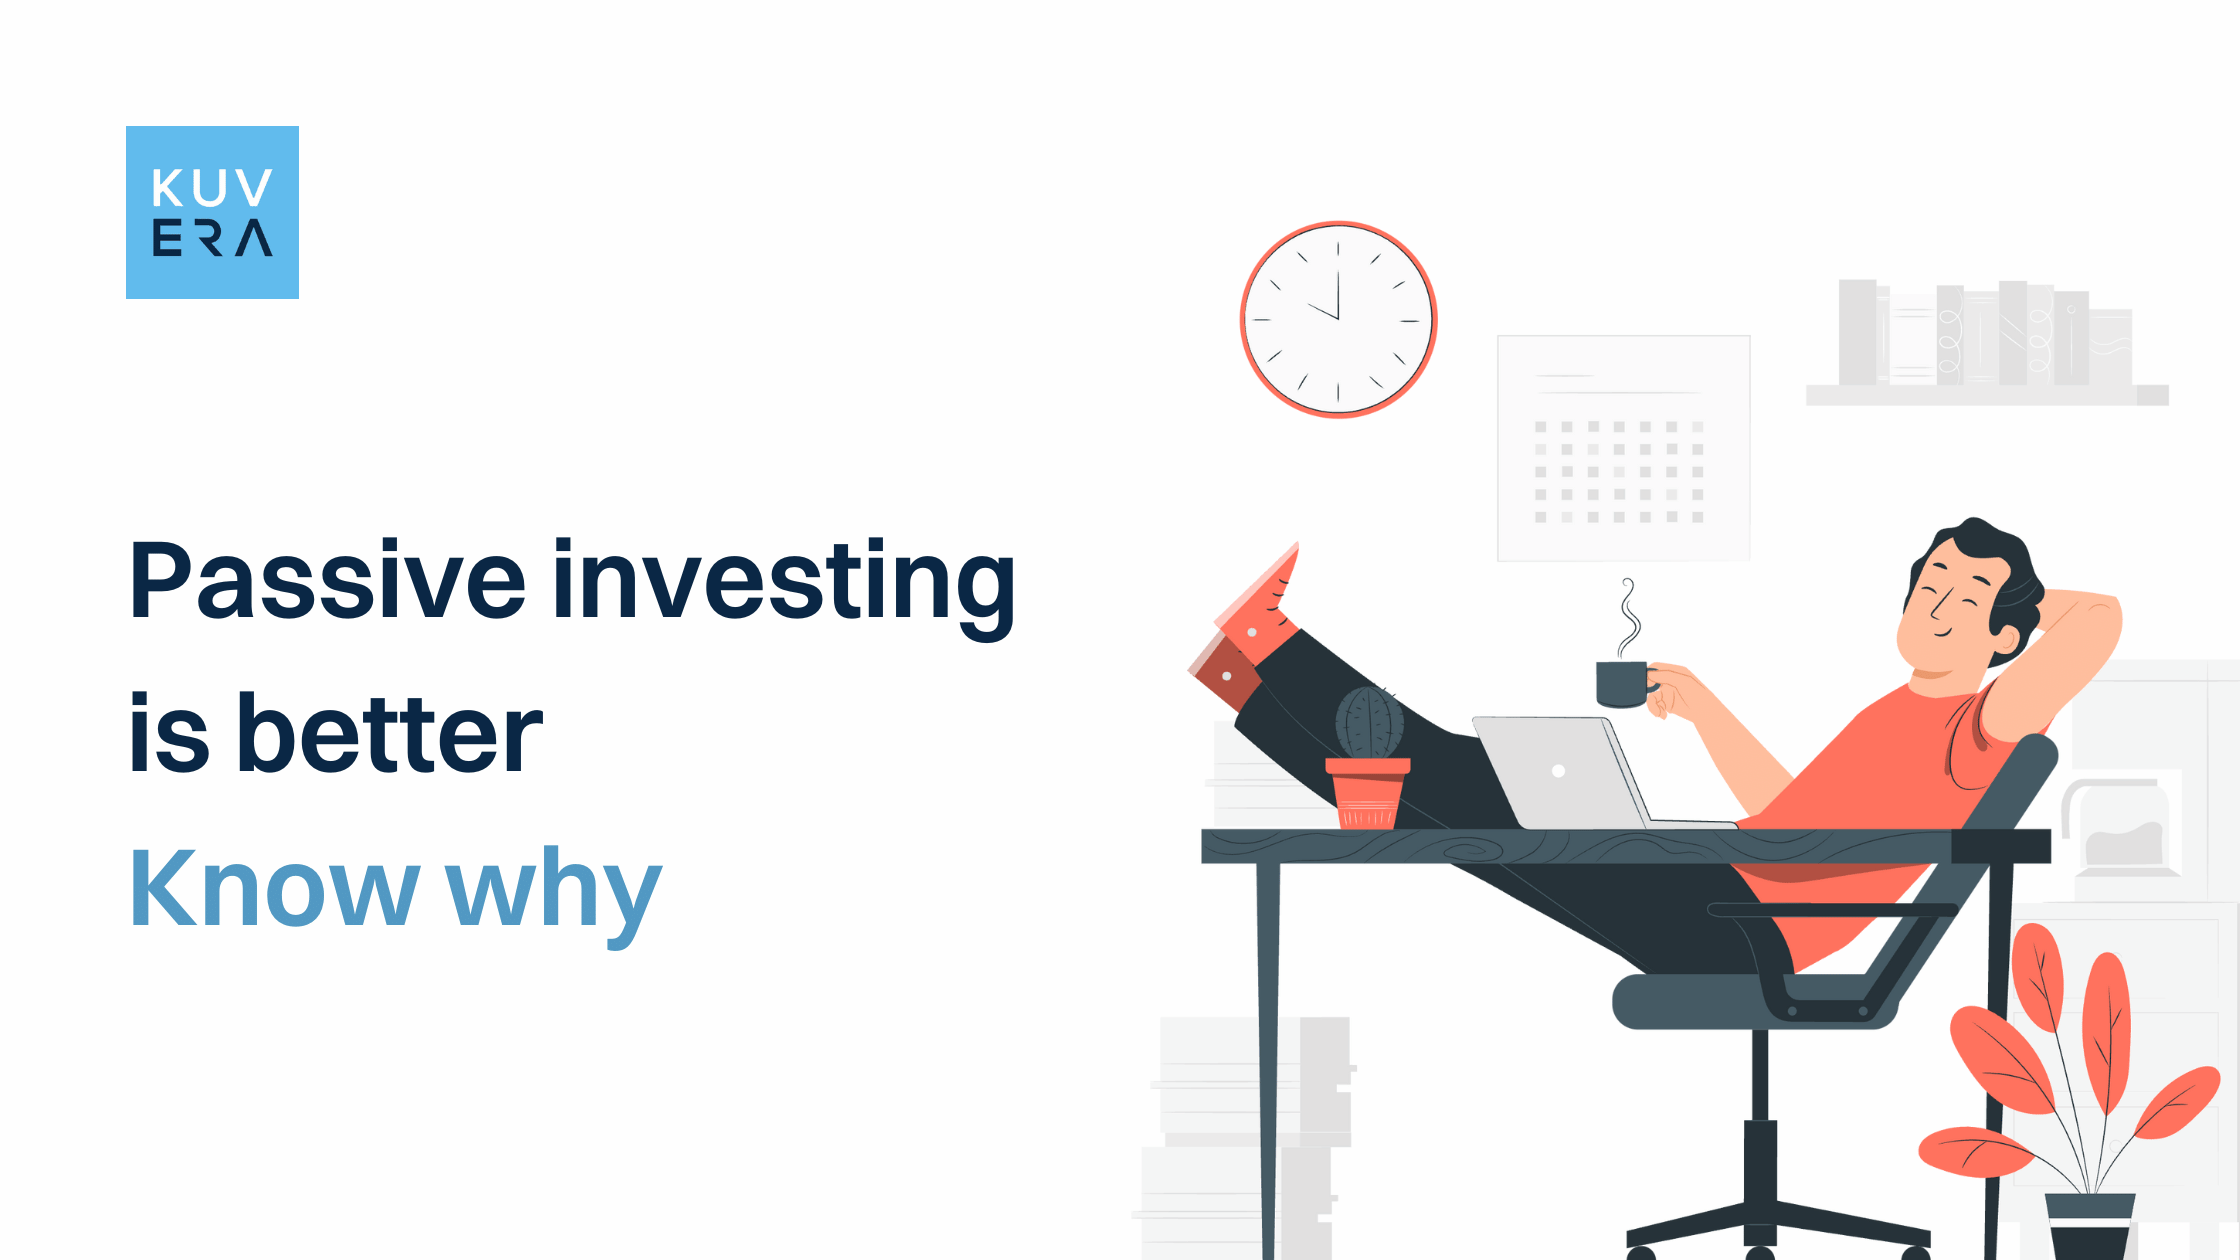 Passive investing is better. Know why.